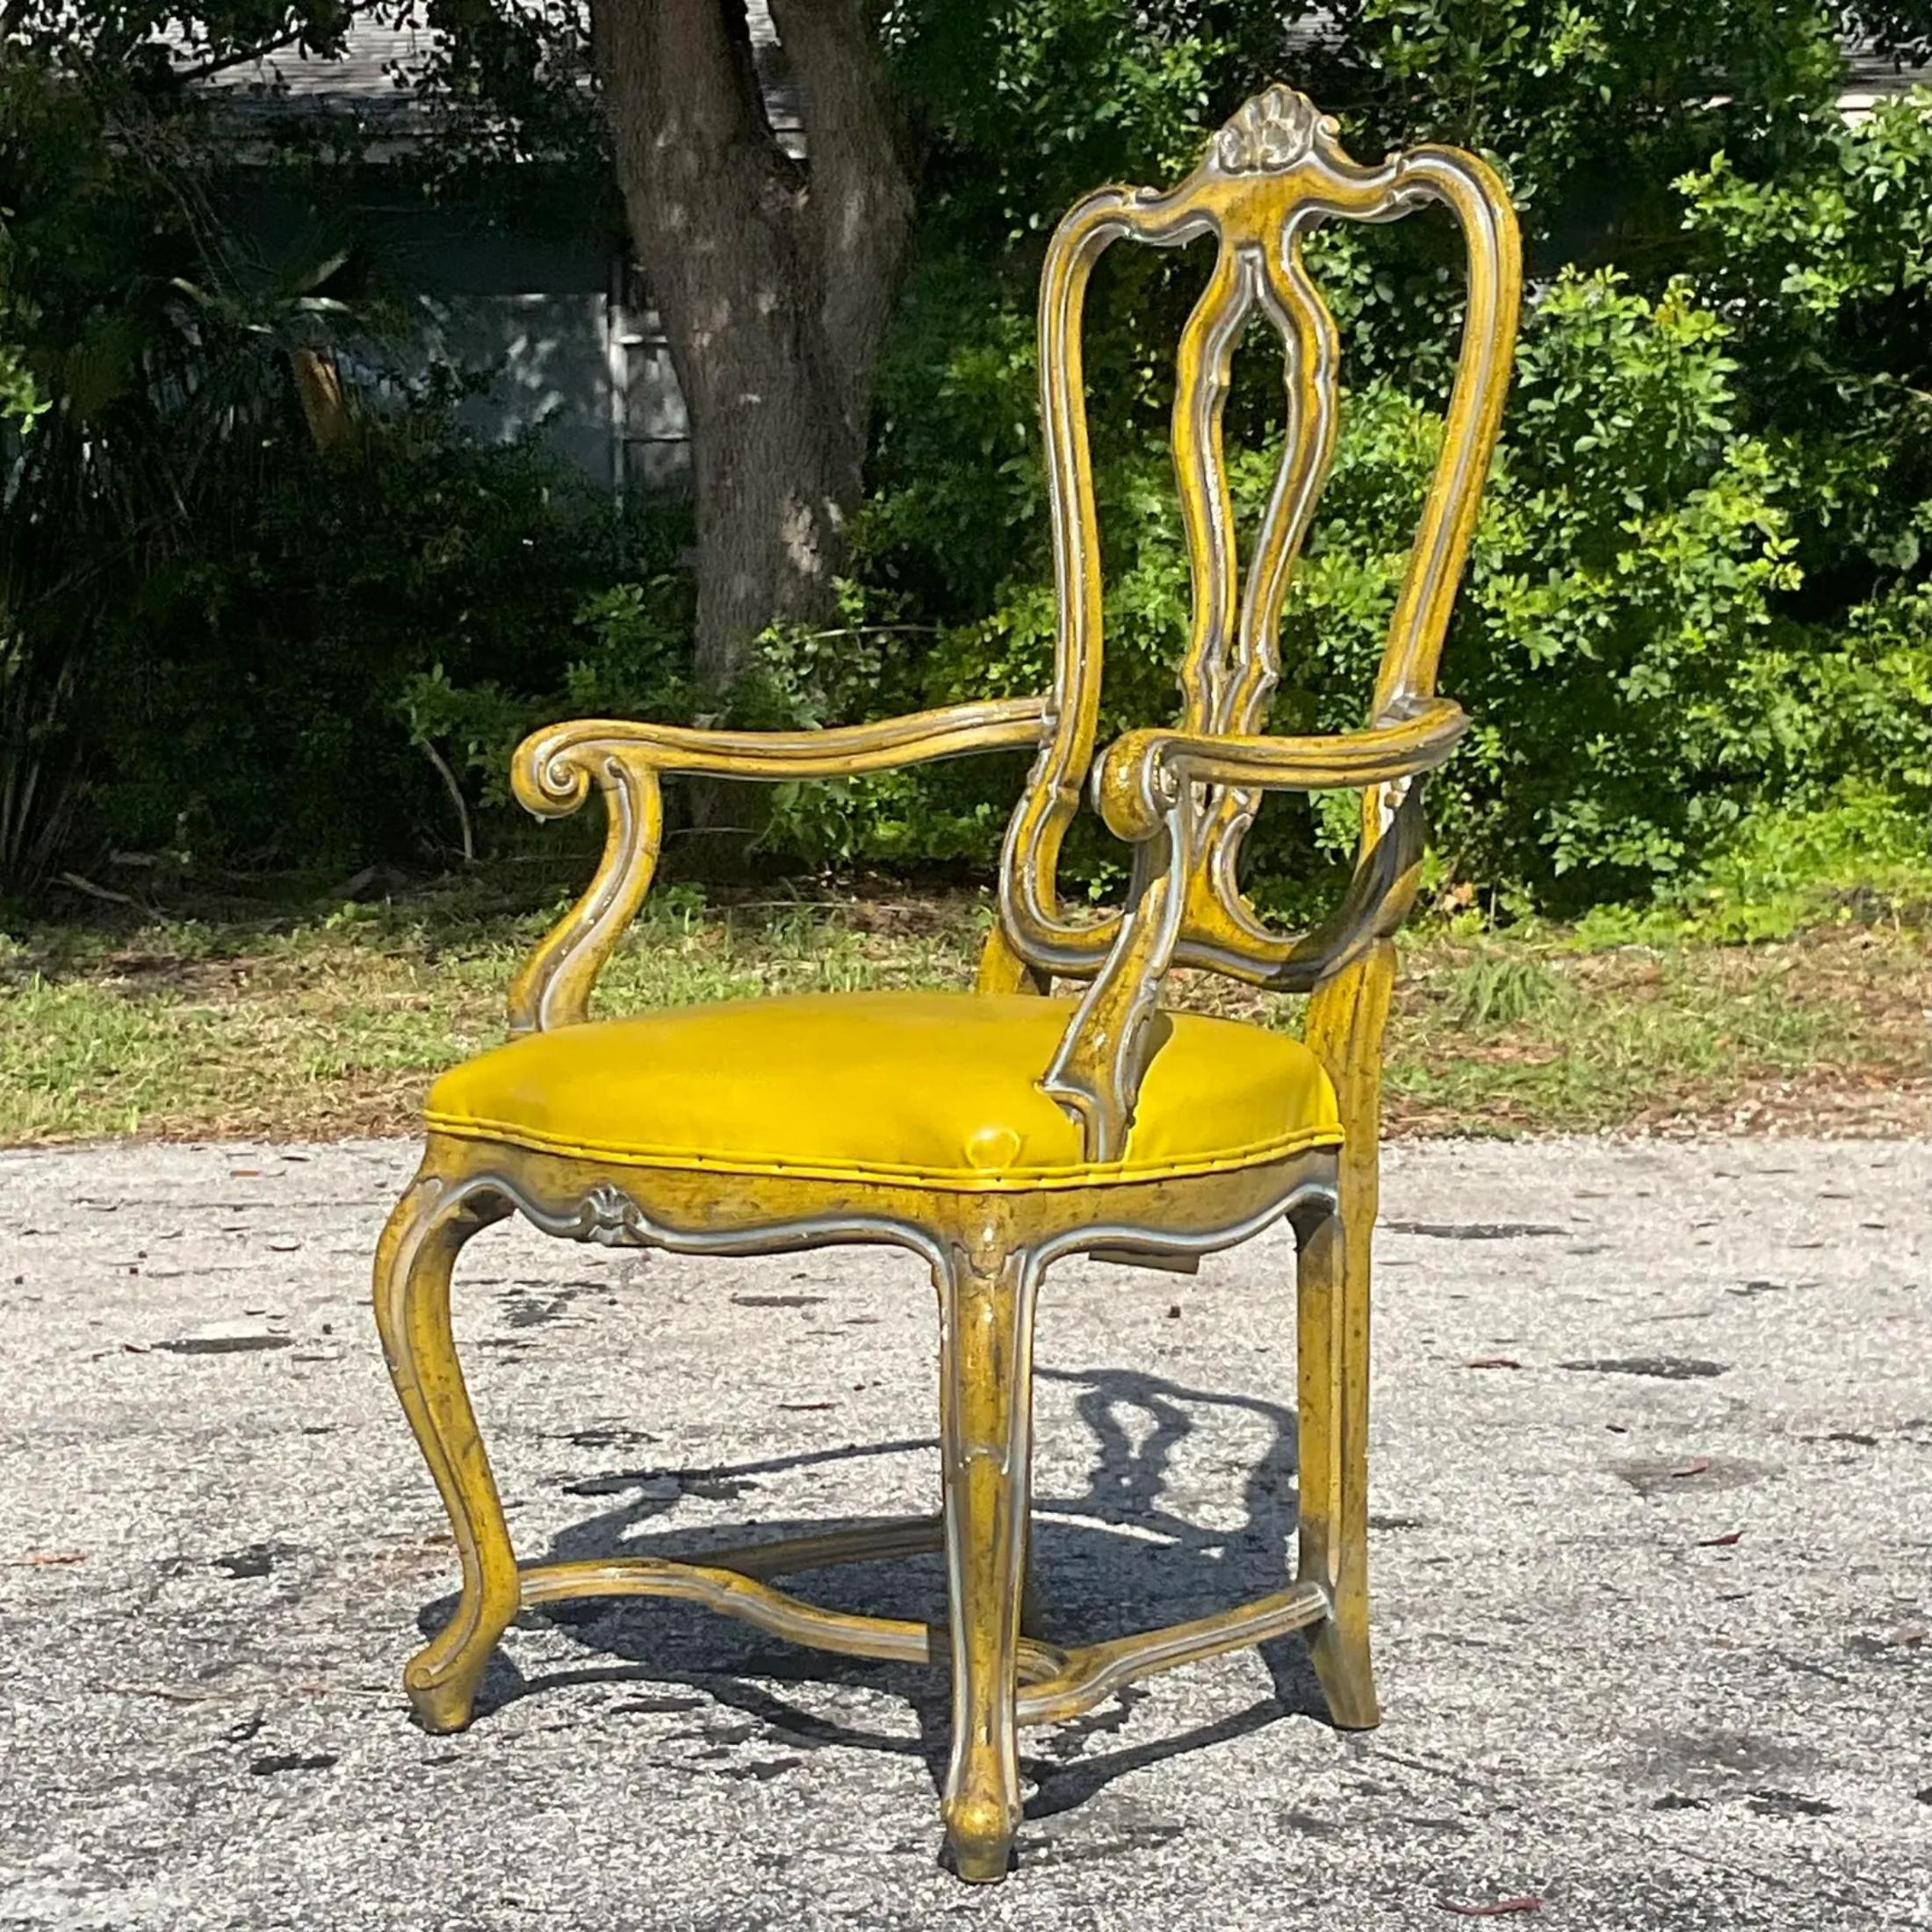 A fabulous vintage Regency desk chair. Made by the Palma group in NYC. A chic high Bach chair with cabriolet legs and a carved clamshell motif on top. A fabulous antiqued yellow finish. Acquired from a Palm Beach estate. 